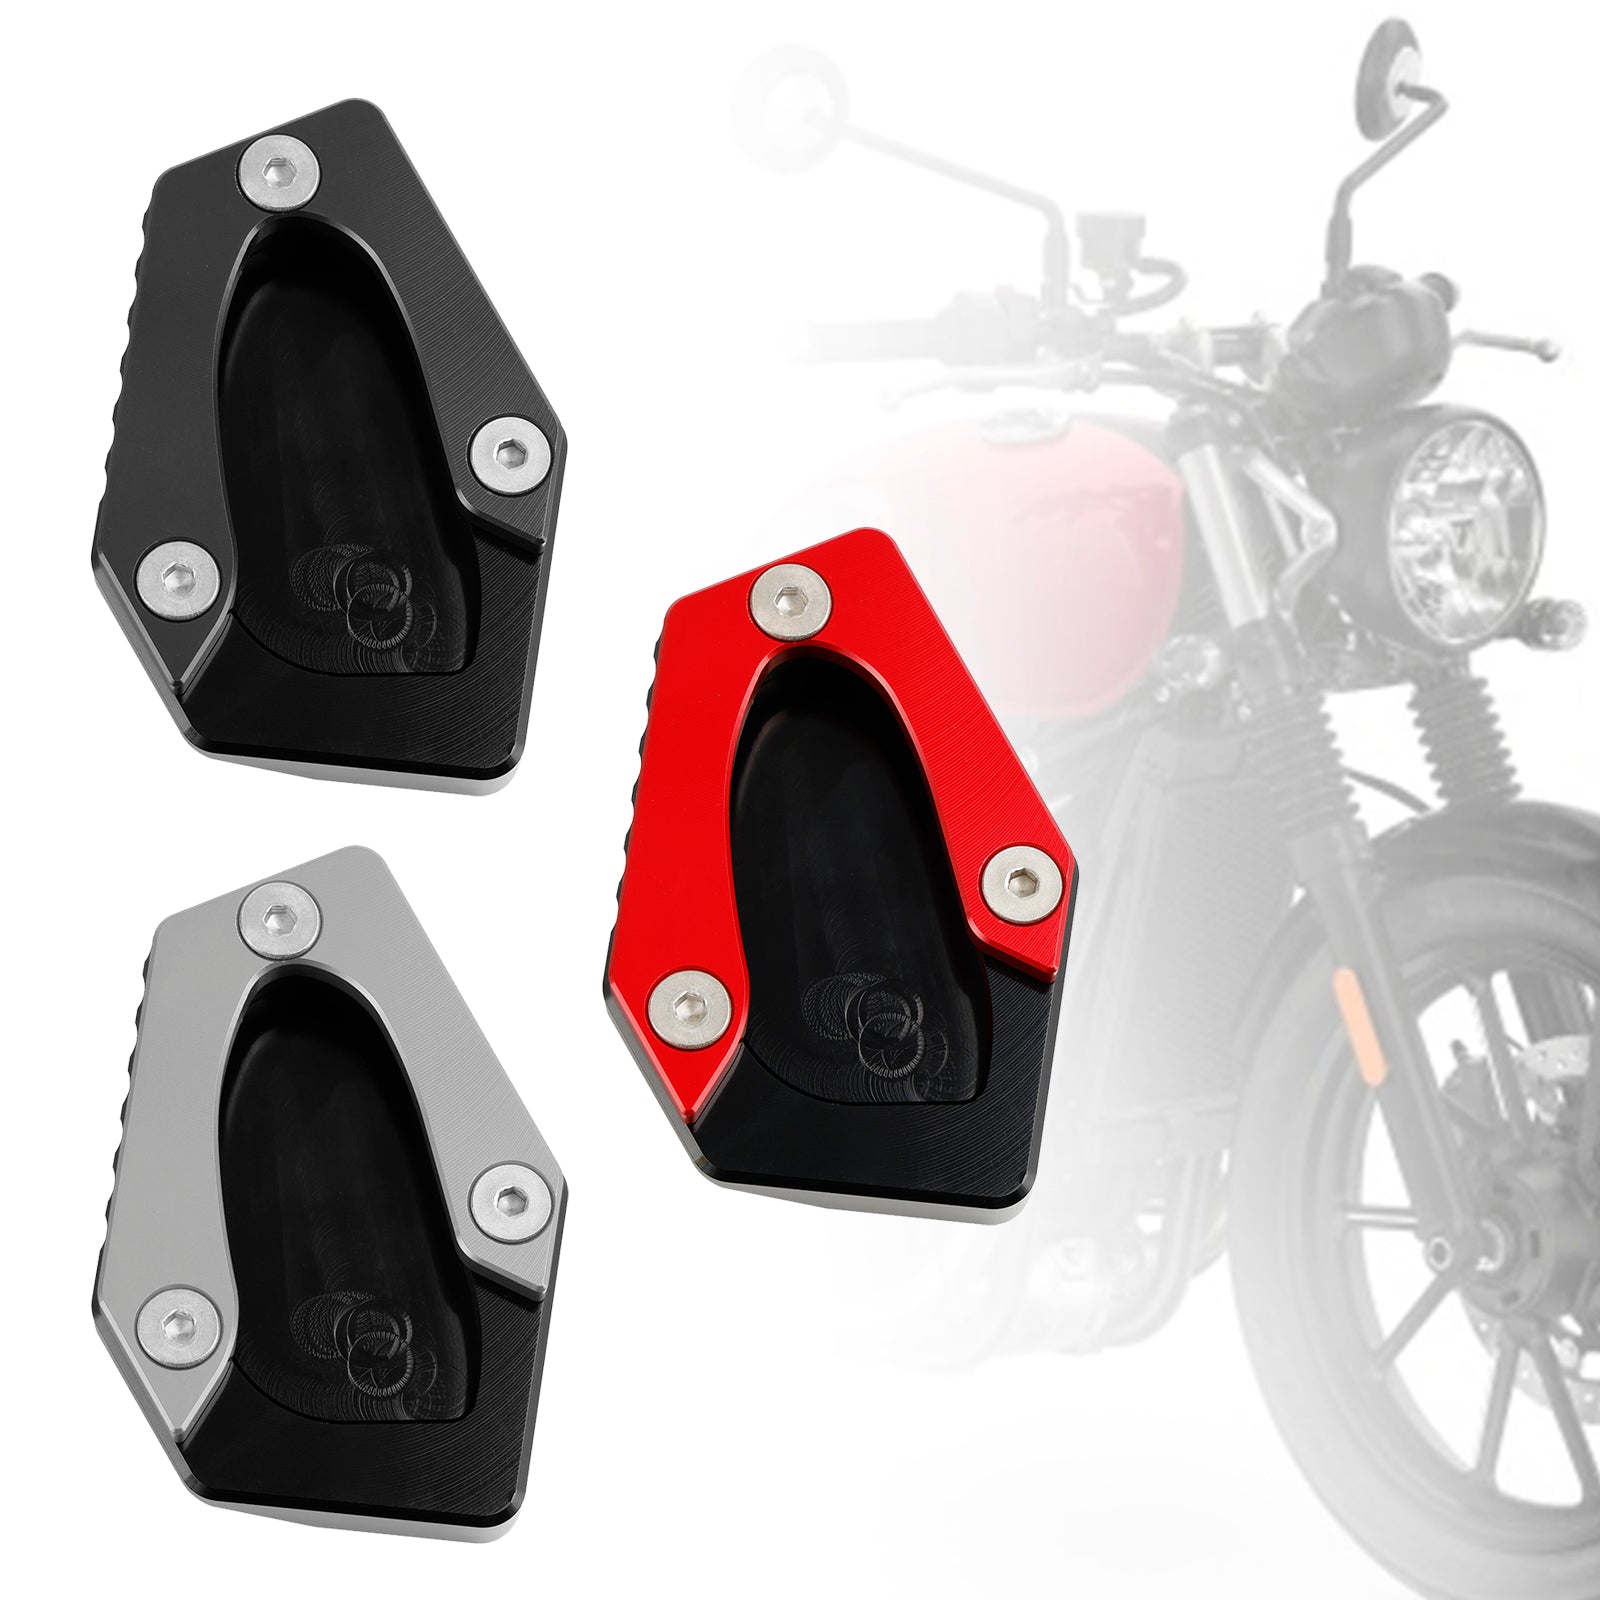 Kickstand Enlarge Plate Pad fit for Speed Twin 900 22-23 Street Cup 900 17-18